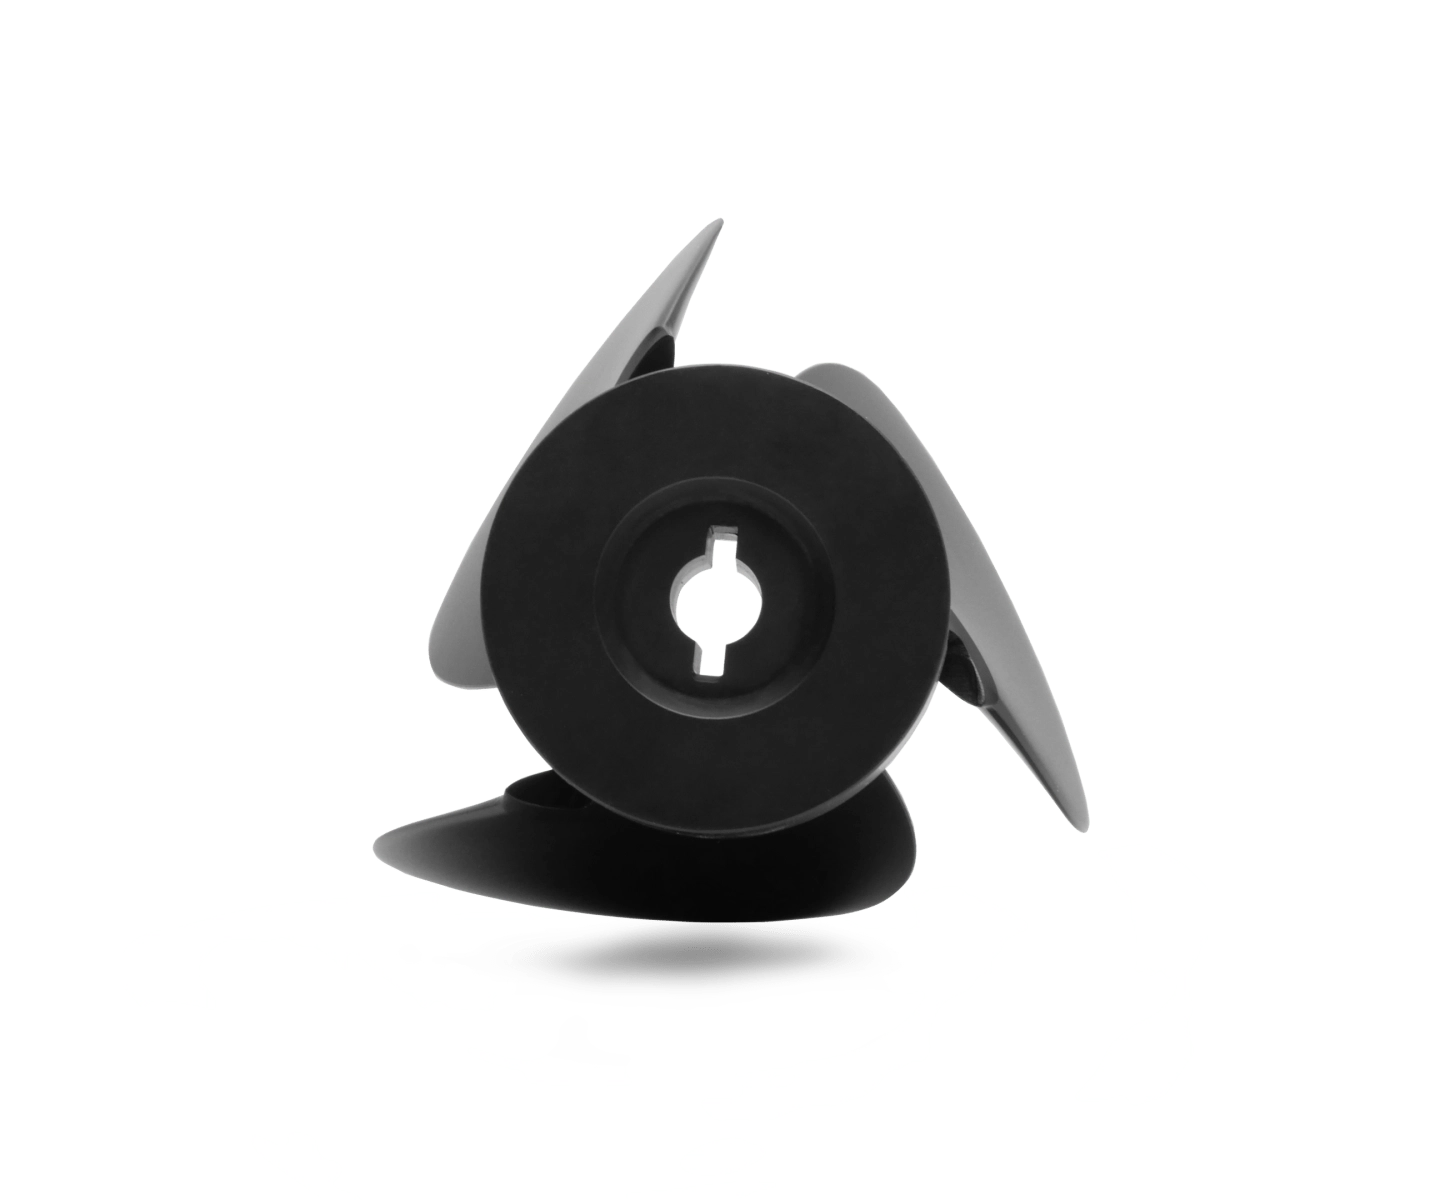 FOIL’s Flex Fold propeller displayed on a black background. The propeller is on its side with all 3 blades visible.